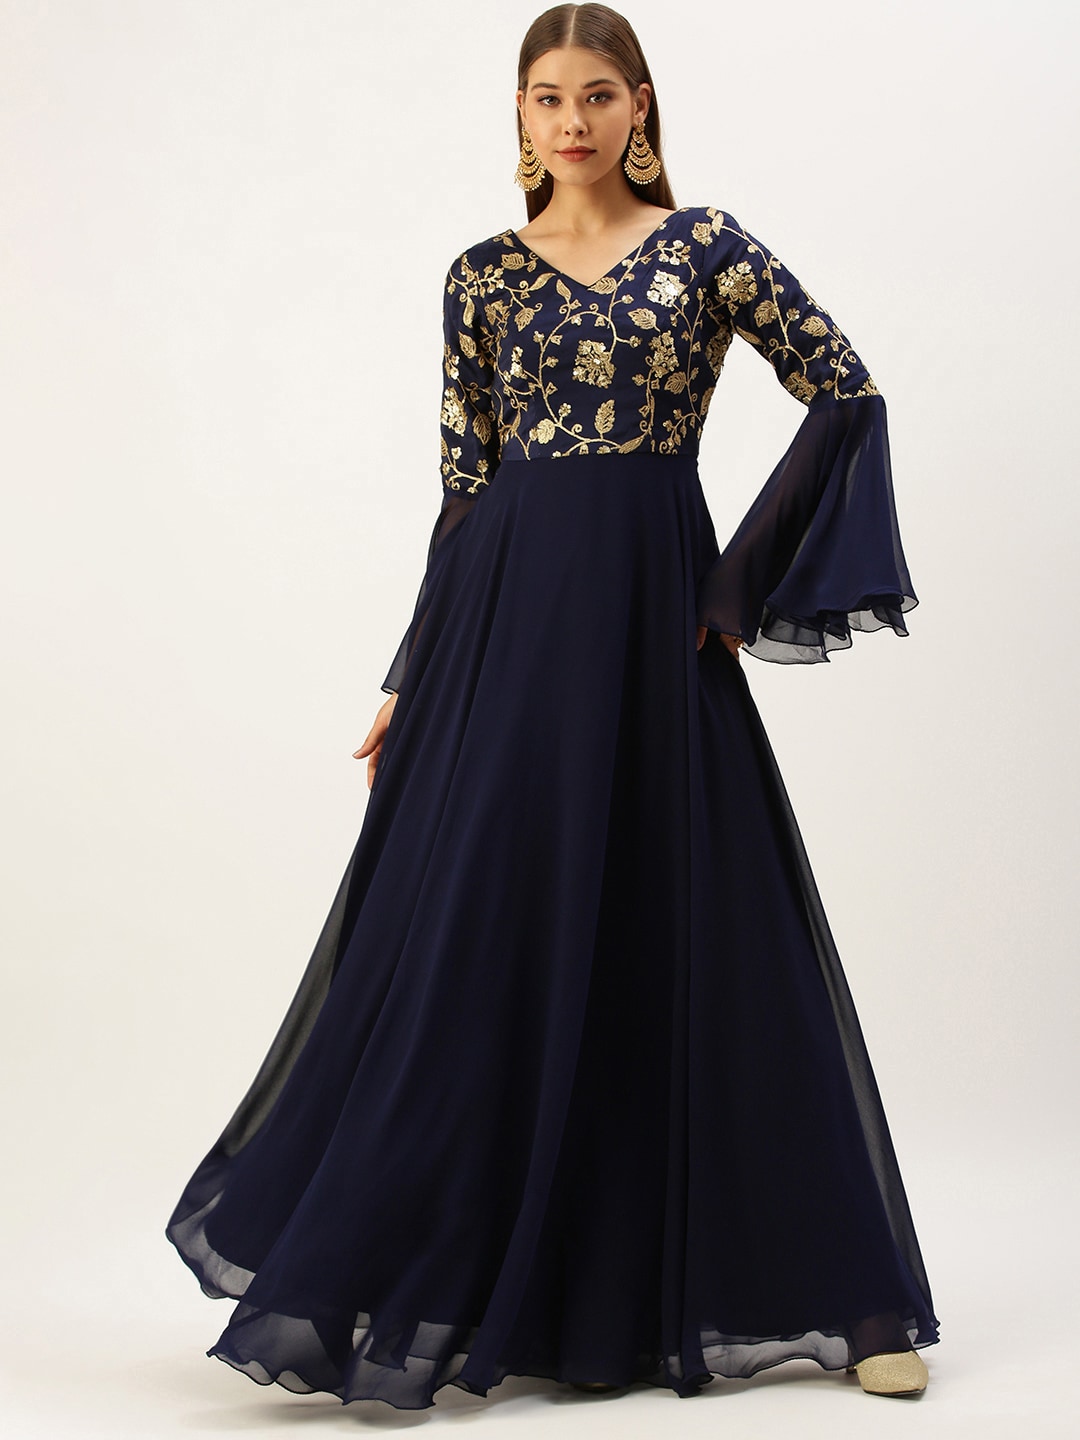 EthnoVogue Women Navy Blue Floral Embroidered Ethnic Maxi Dress Price in India